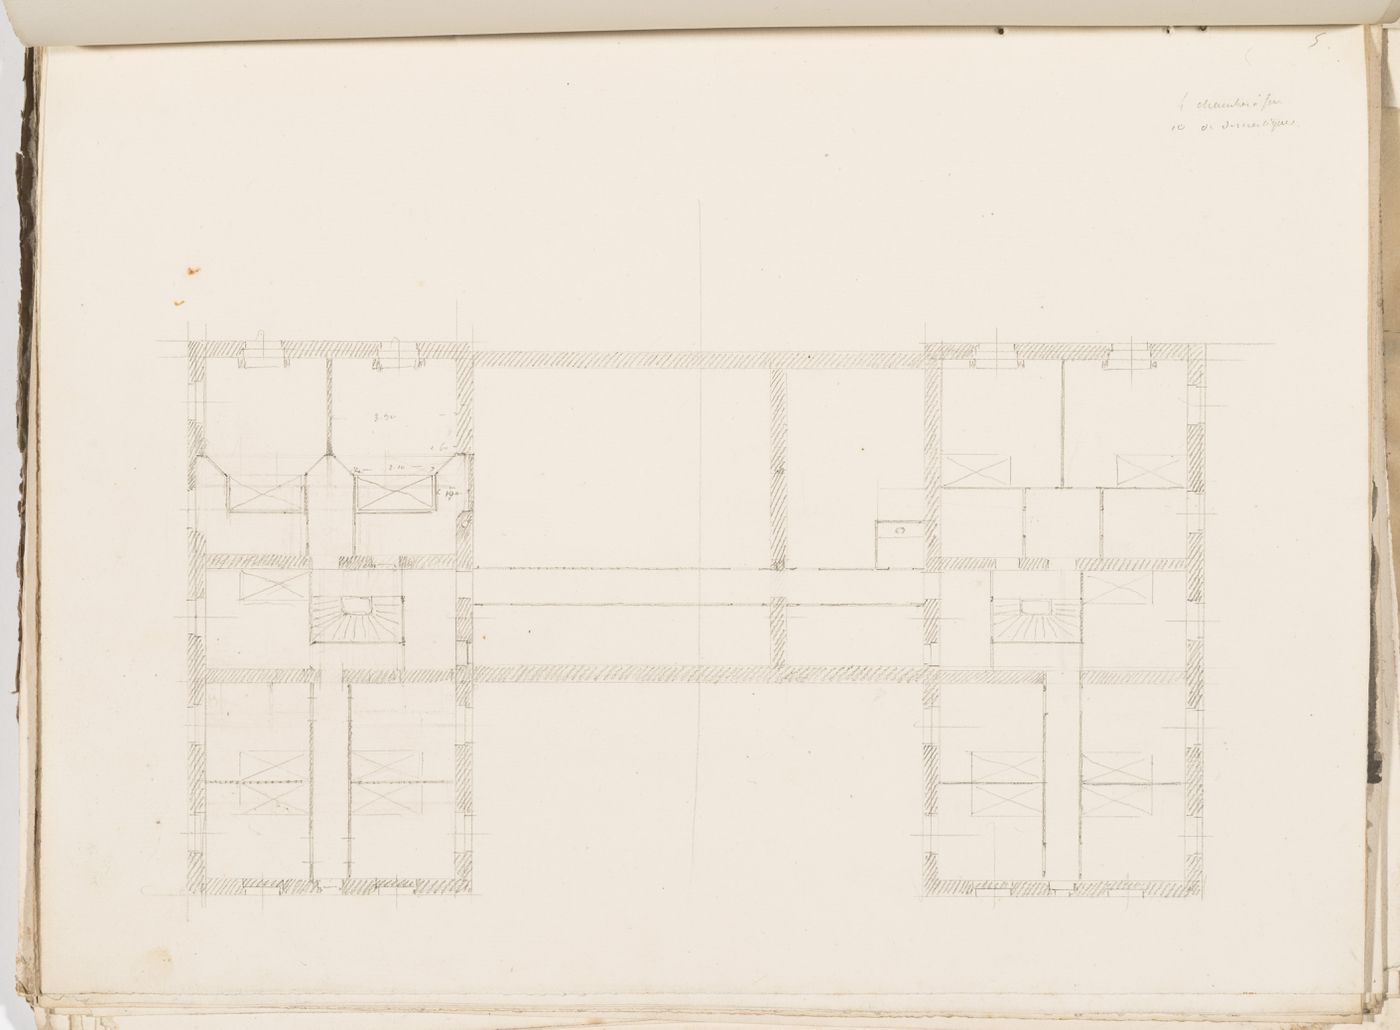 Project no. 5 for a country house for comte Treilhard: Second floor plan